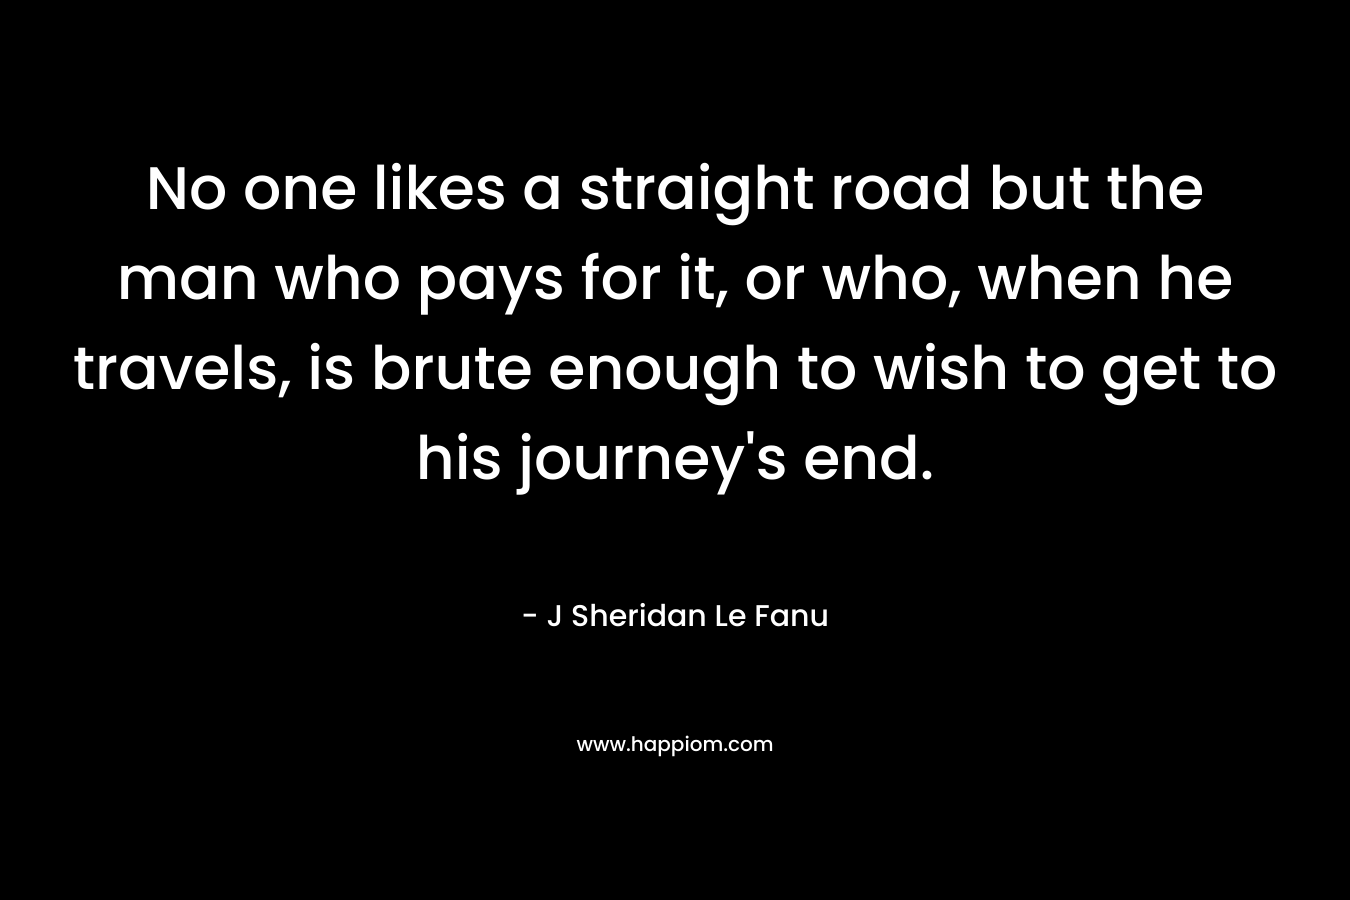 No one likes a straight road but the man who pays for it, or who, when he travels, is brute enough to wish to get to his journey’s end. – J Sheridan Le Fanu